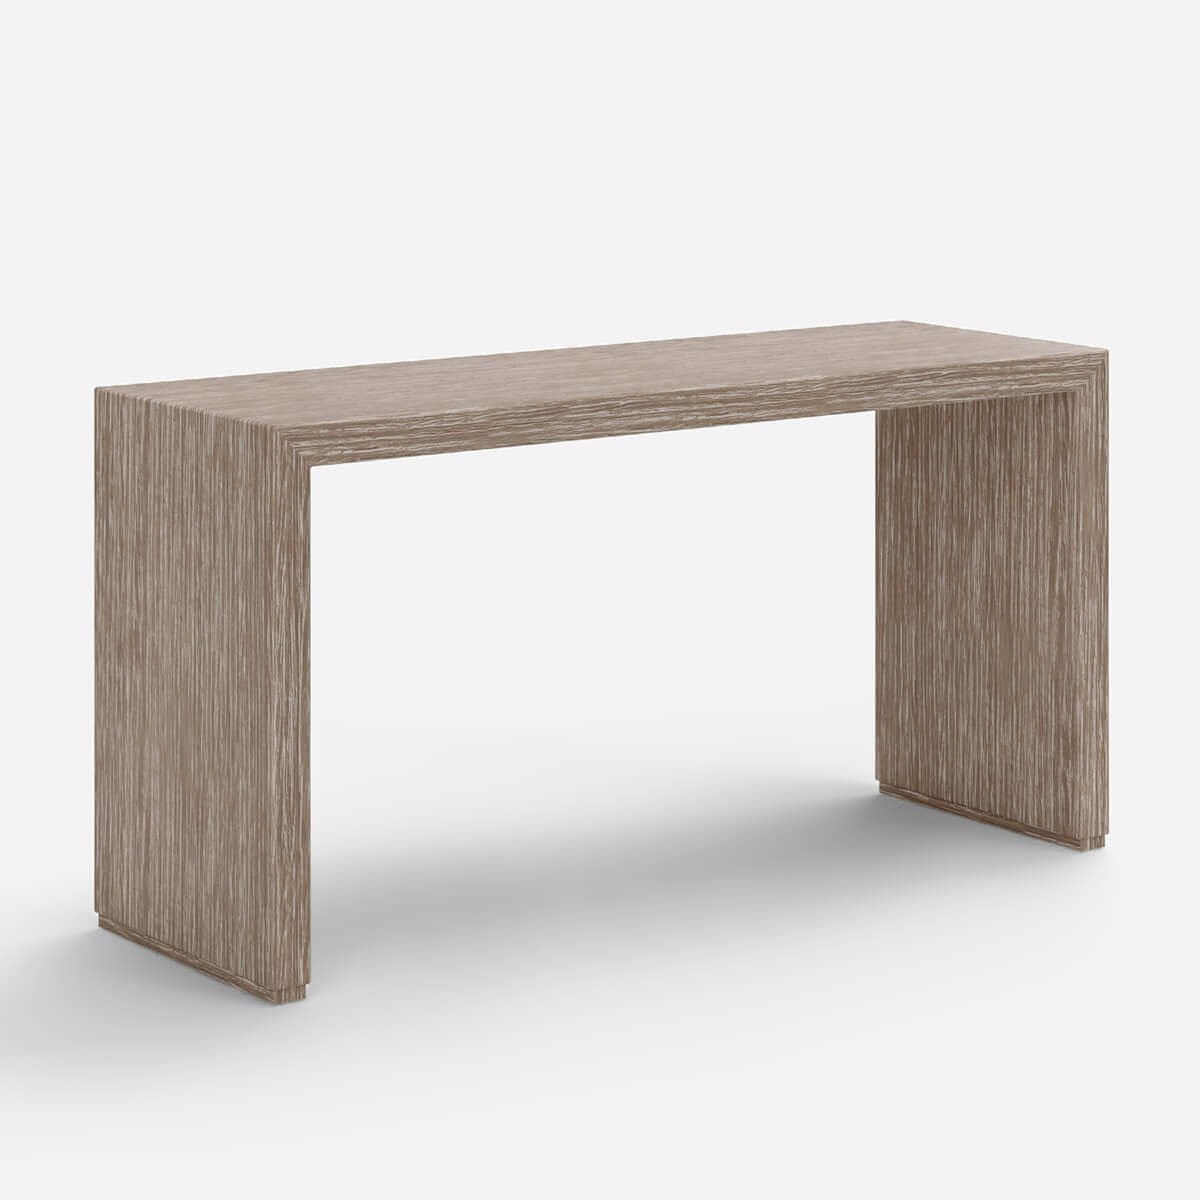 The Simply Refined Console Table